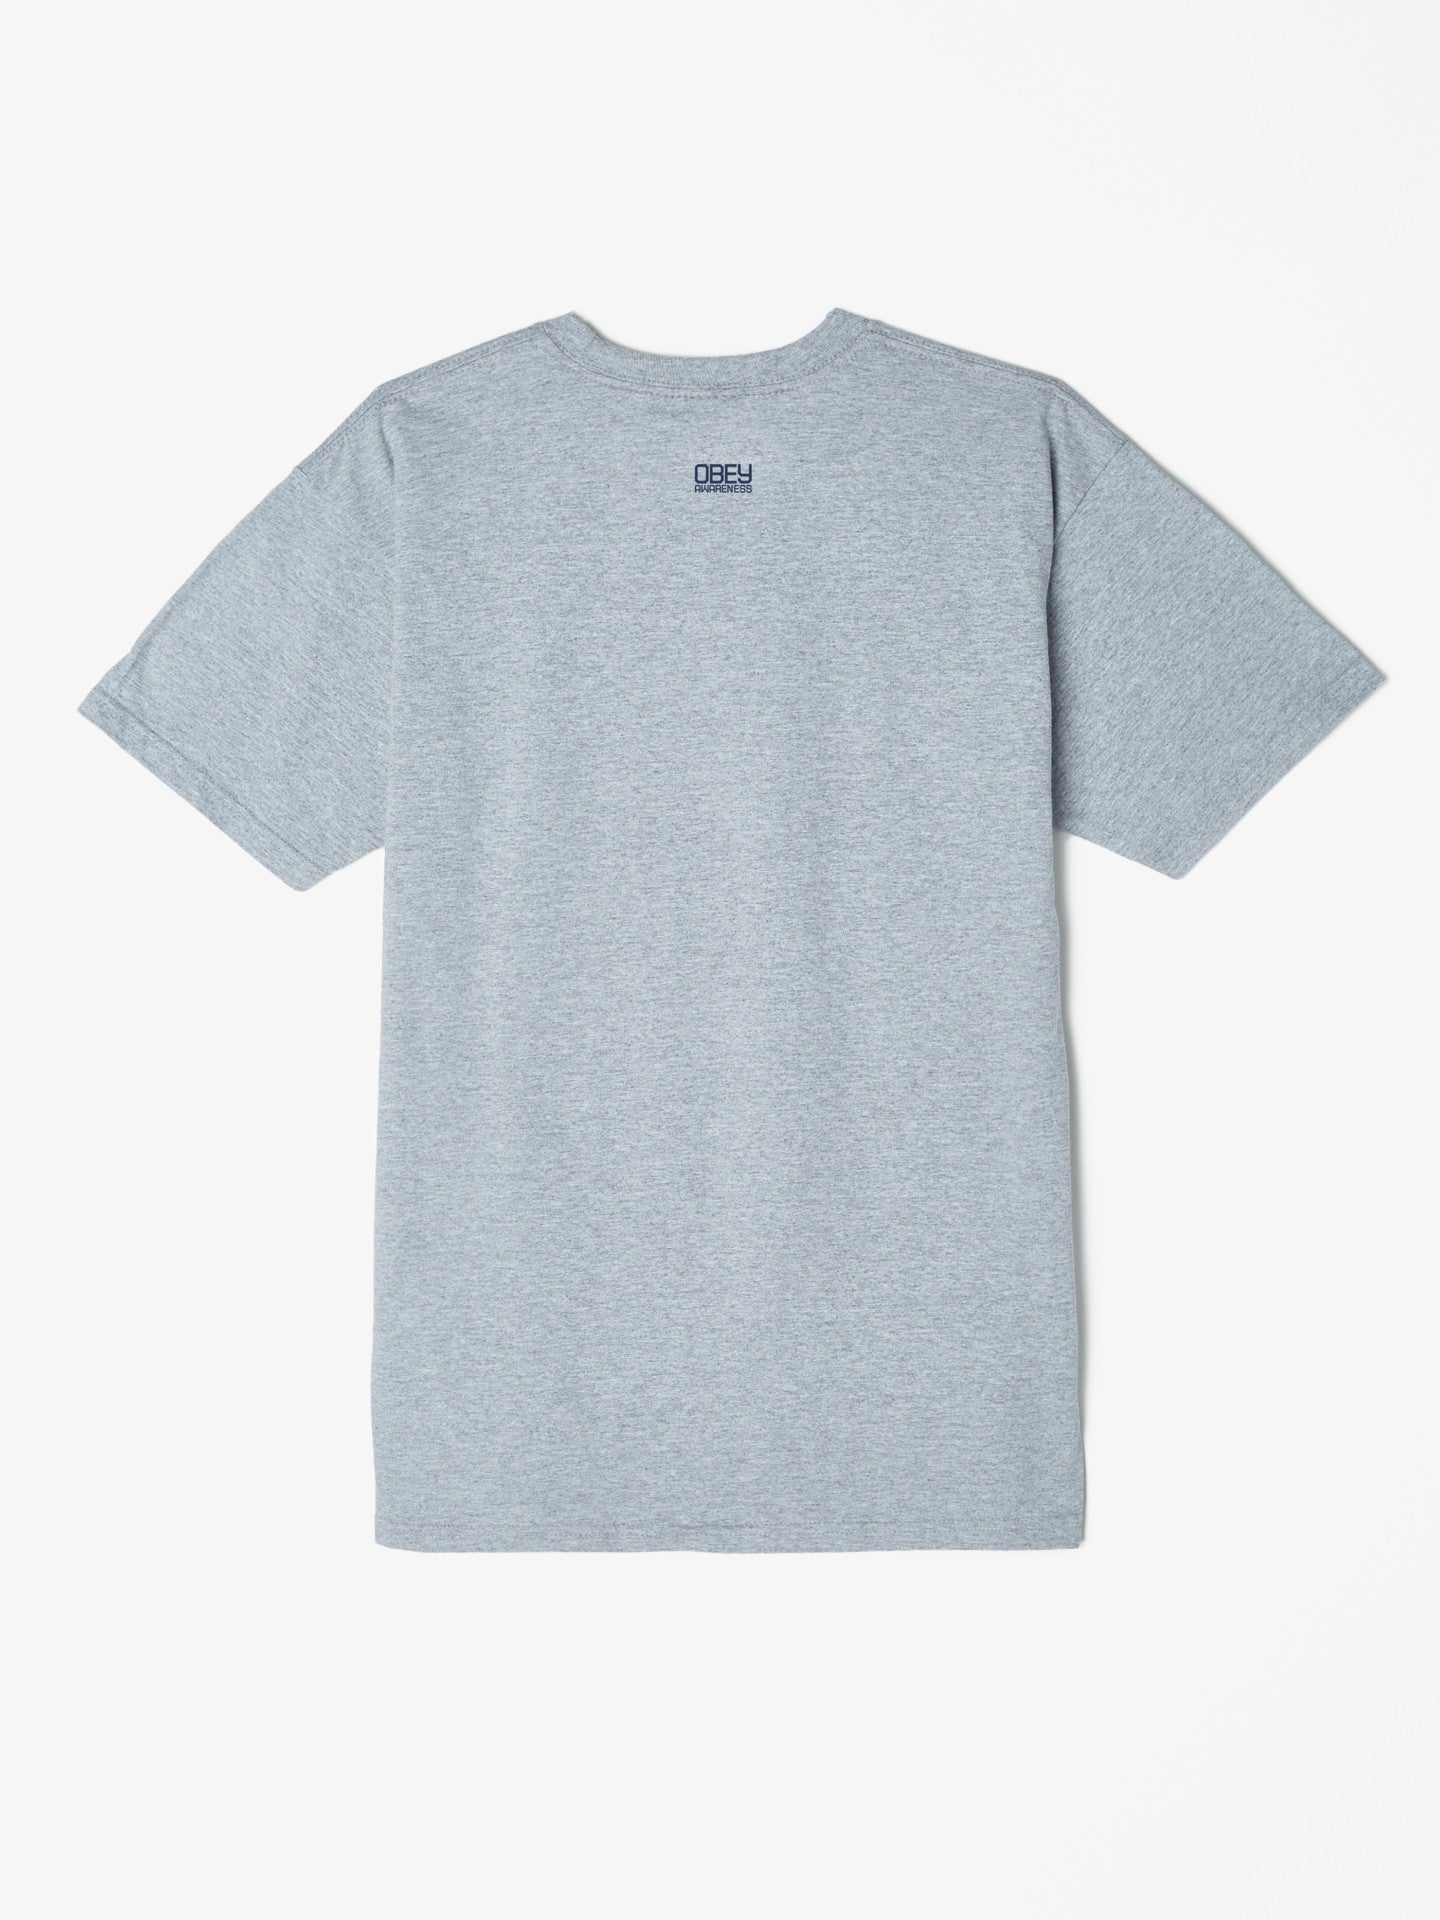 OBEY - Defend Dignity Men's Shirt, Heather Grey - The Giant Peach